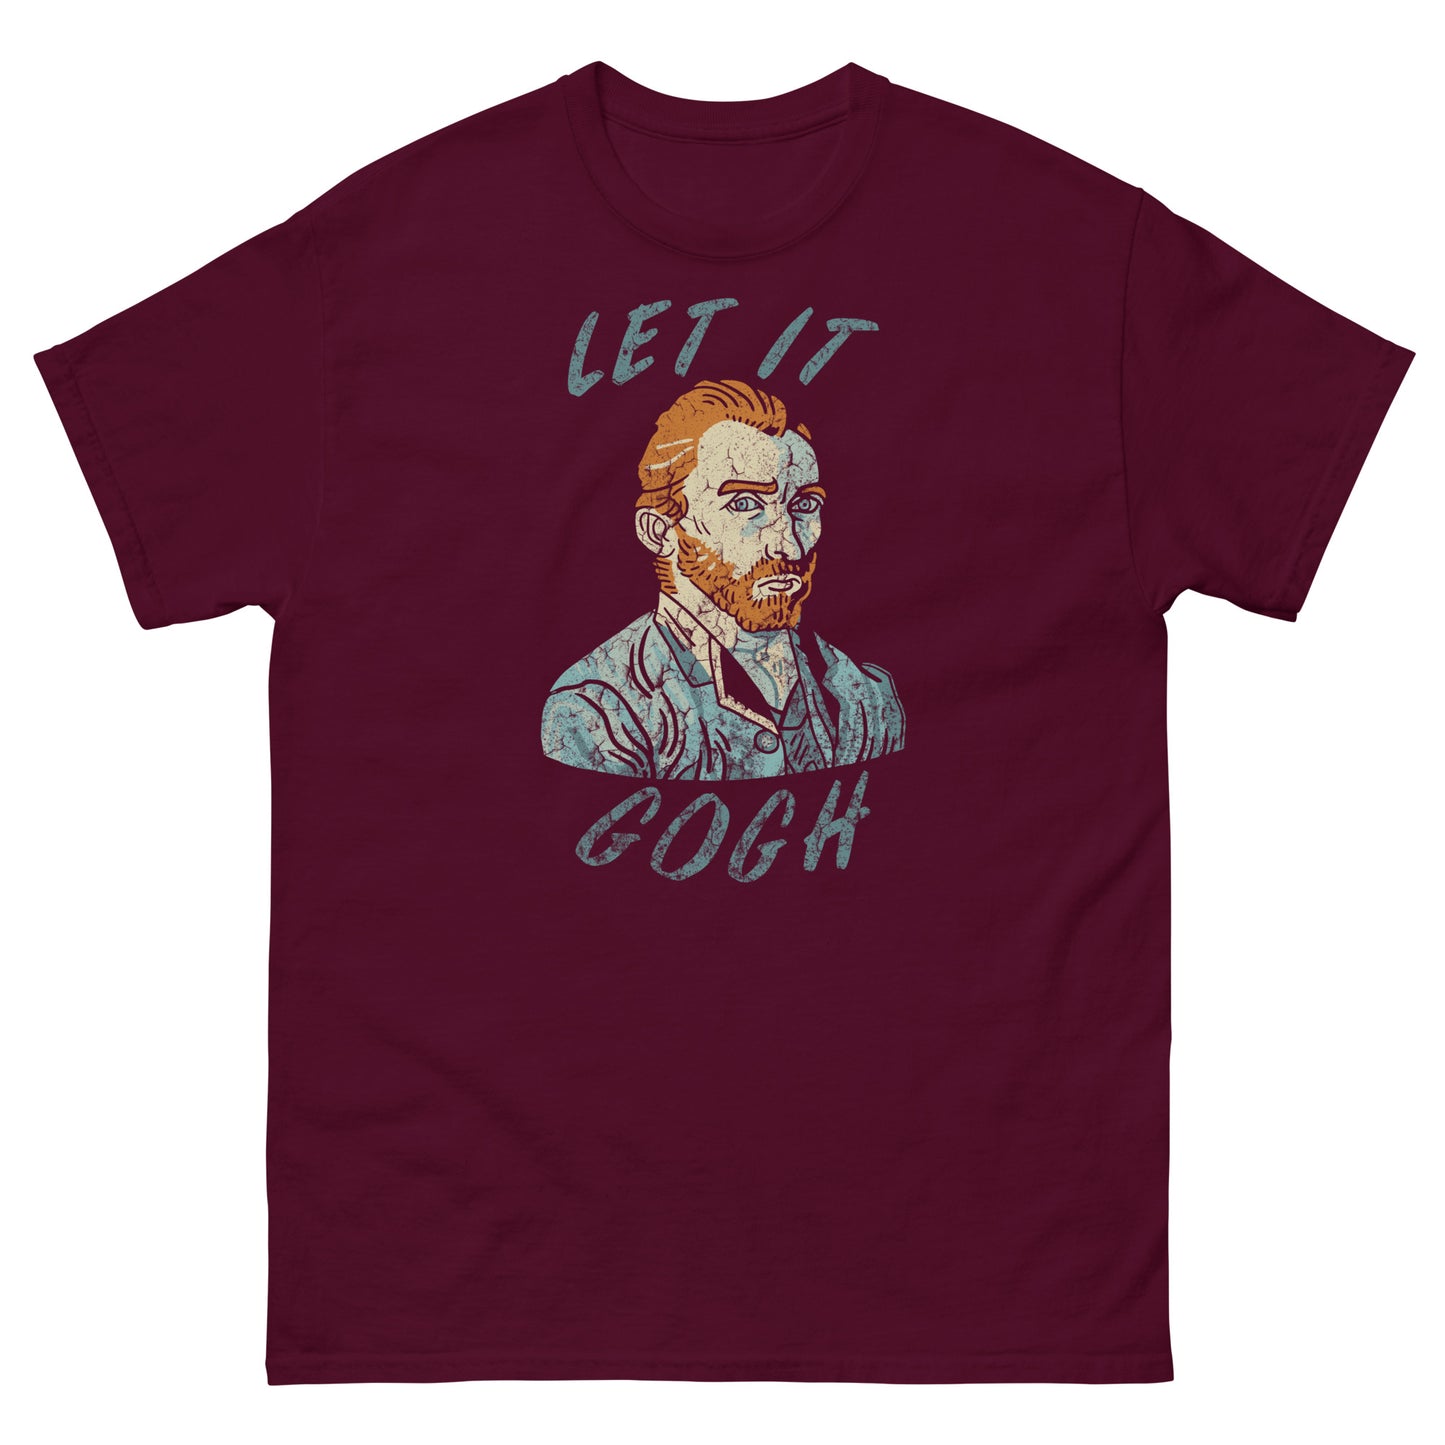 Let It Gogh classic tee